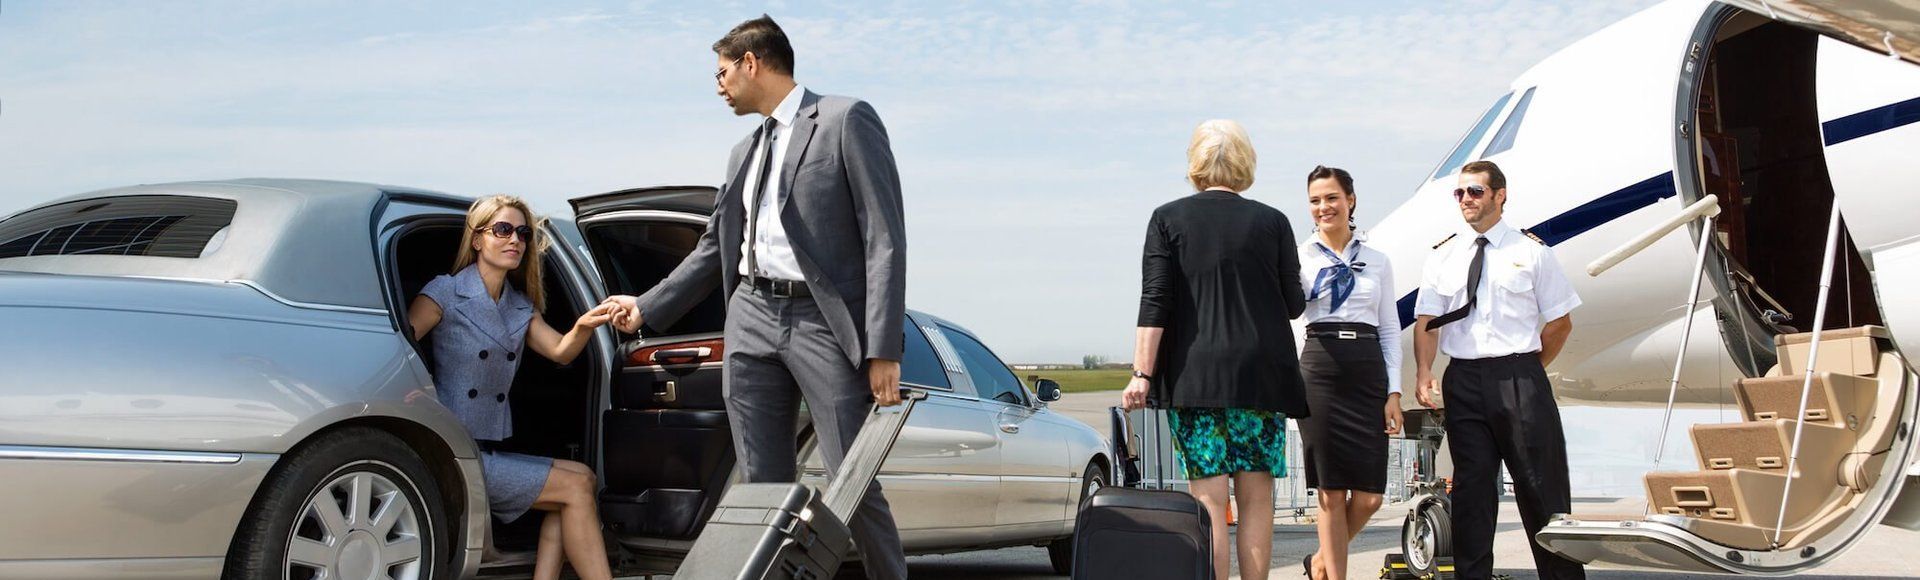 Airport Car Service From Toms River to Newark Airport